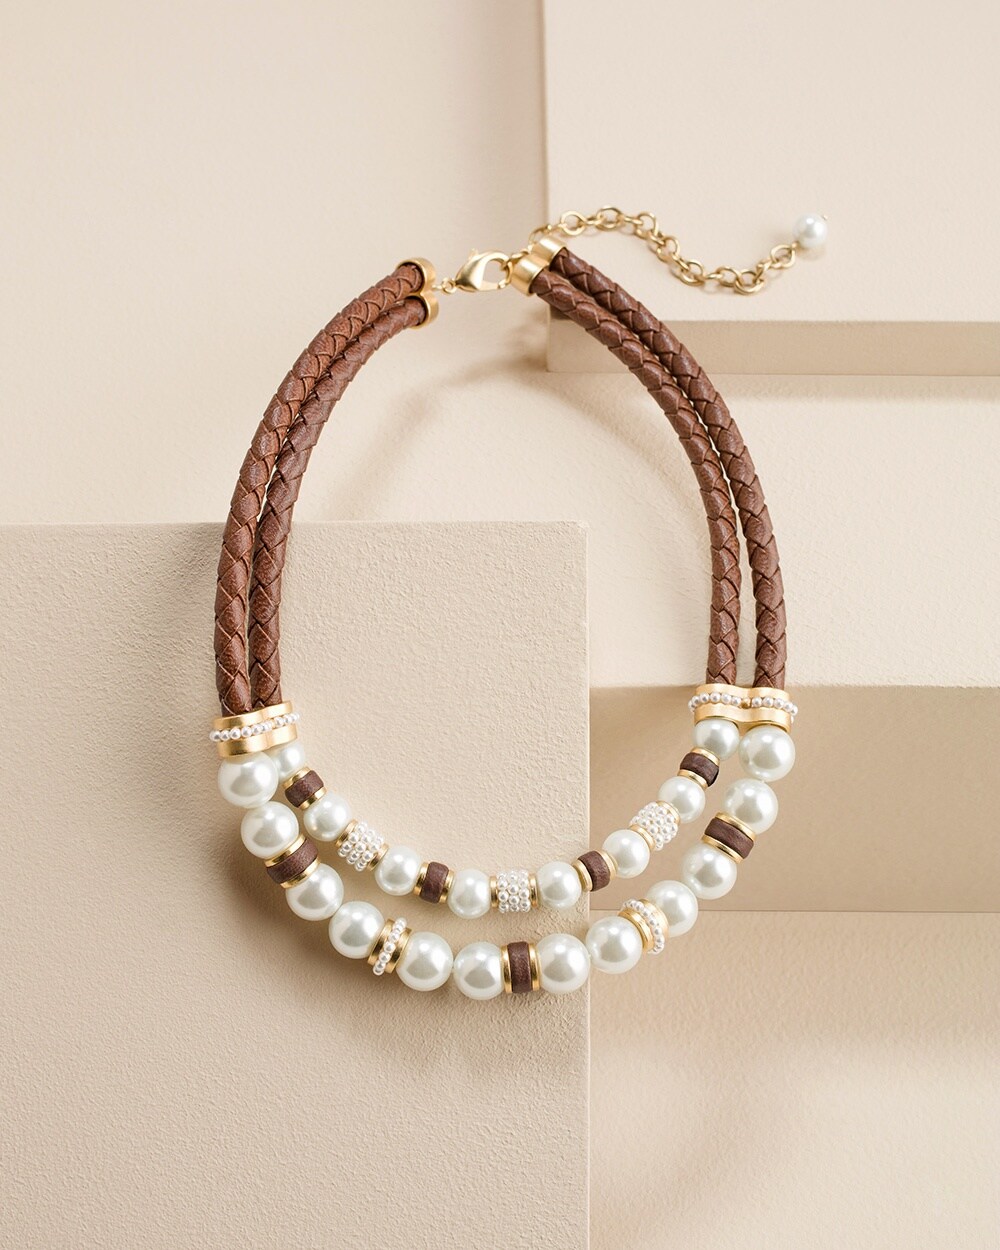 Faux-Pearl and Faux-Leather Bib Necklace